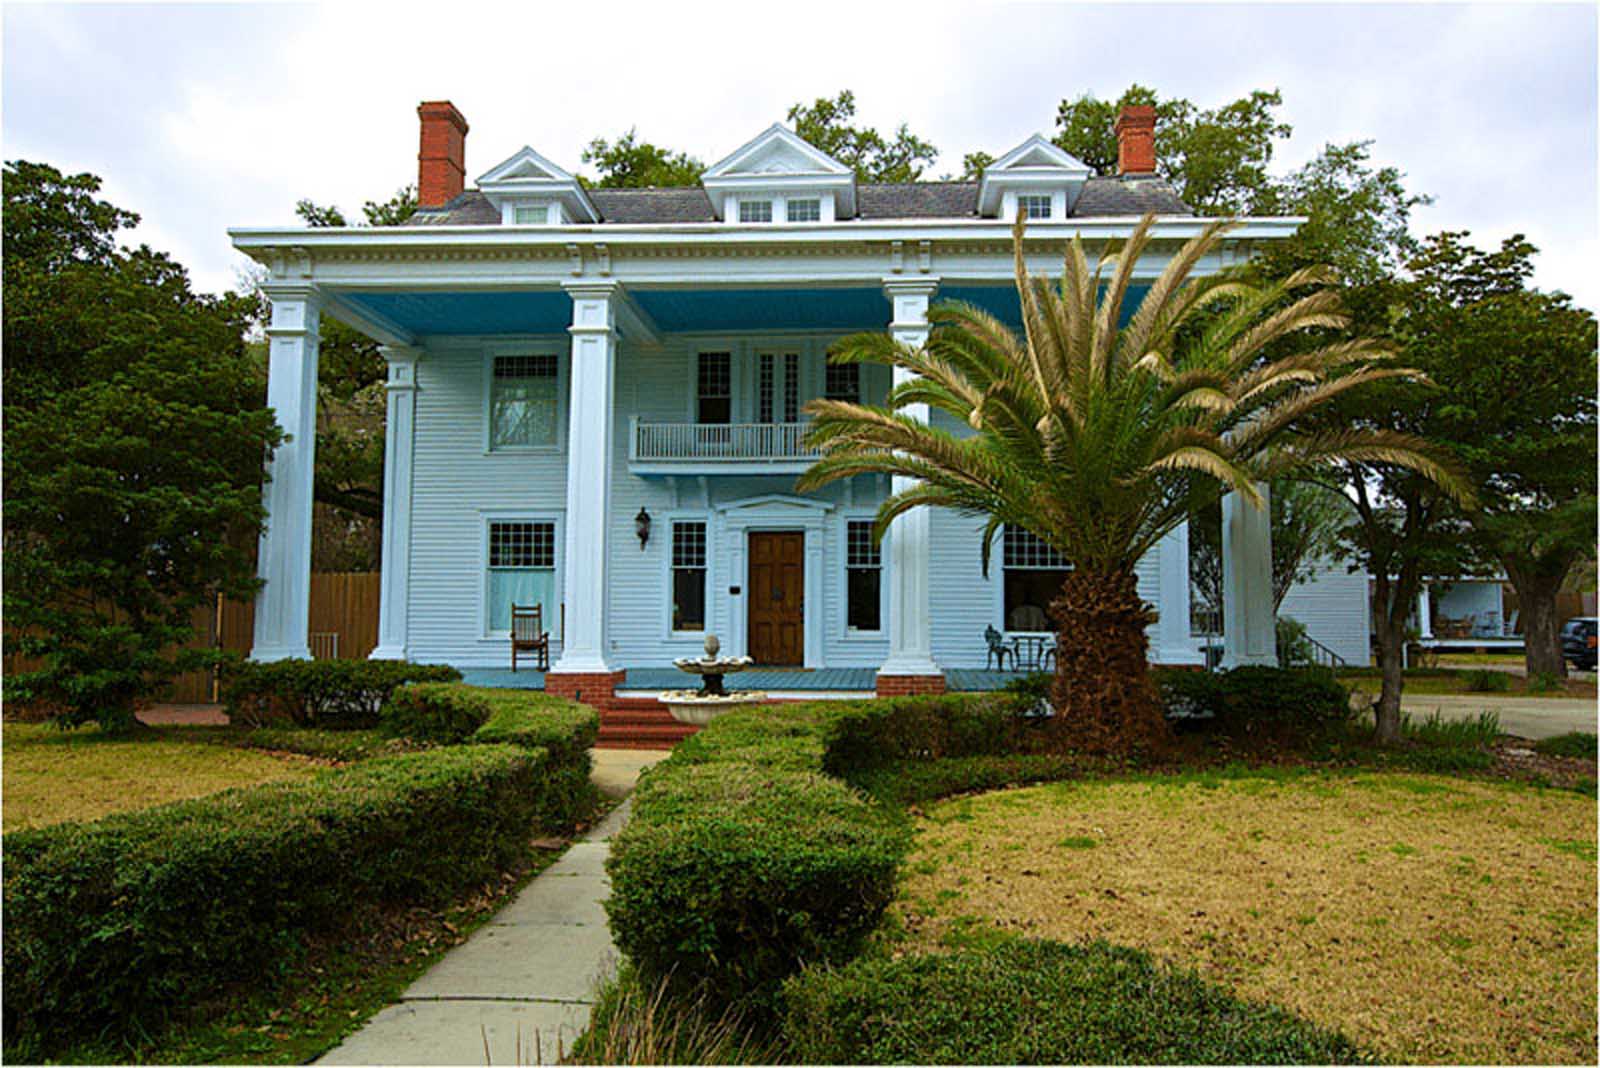 historic house things to do in Lake charles